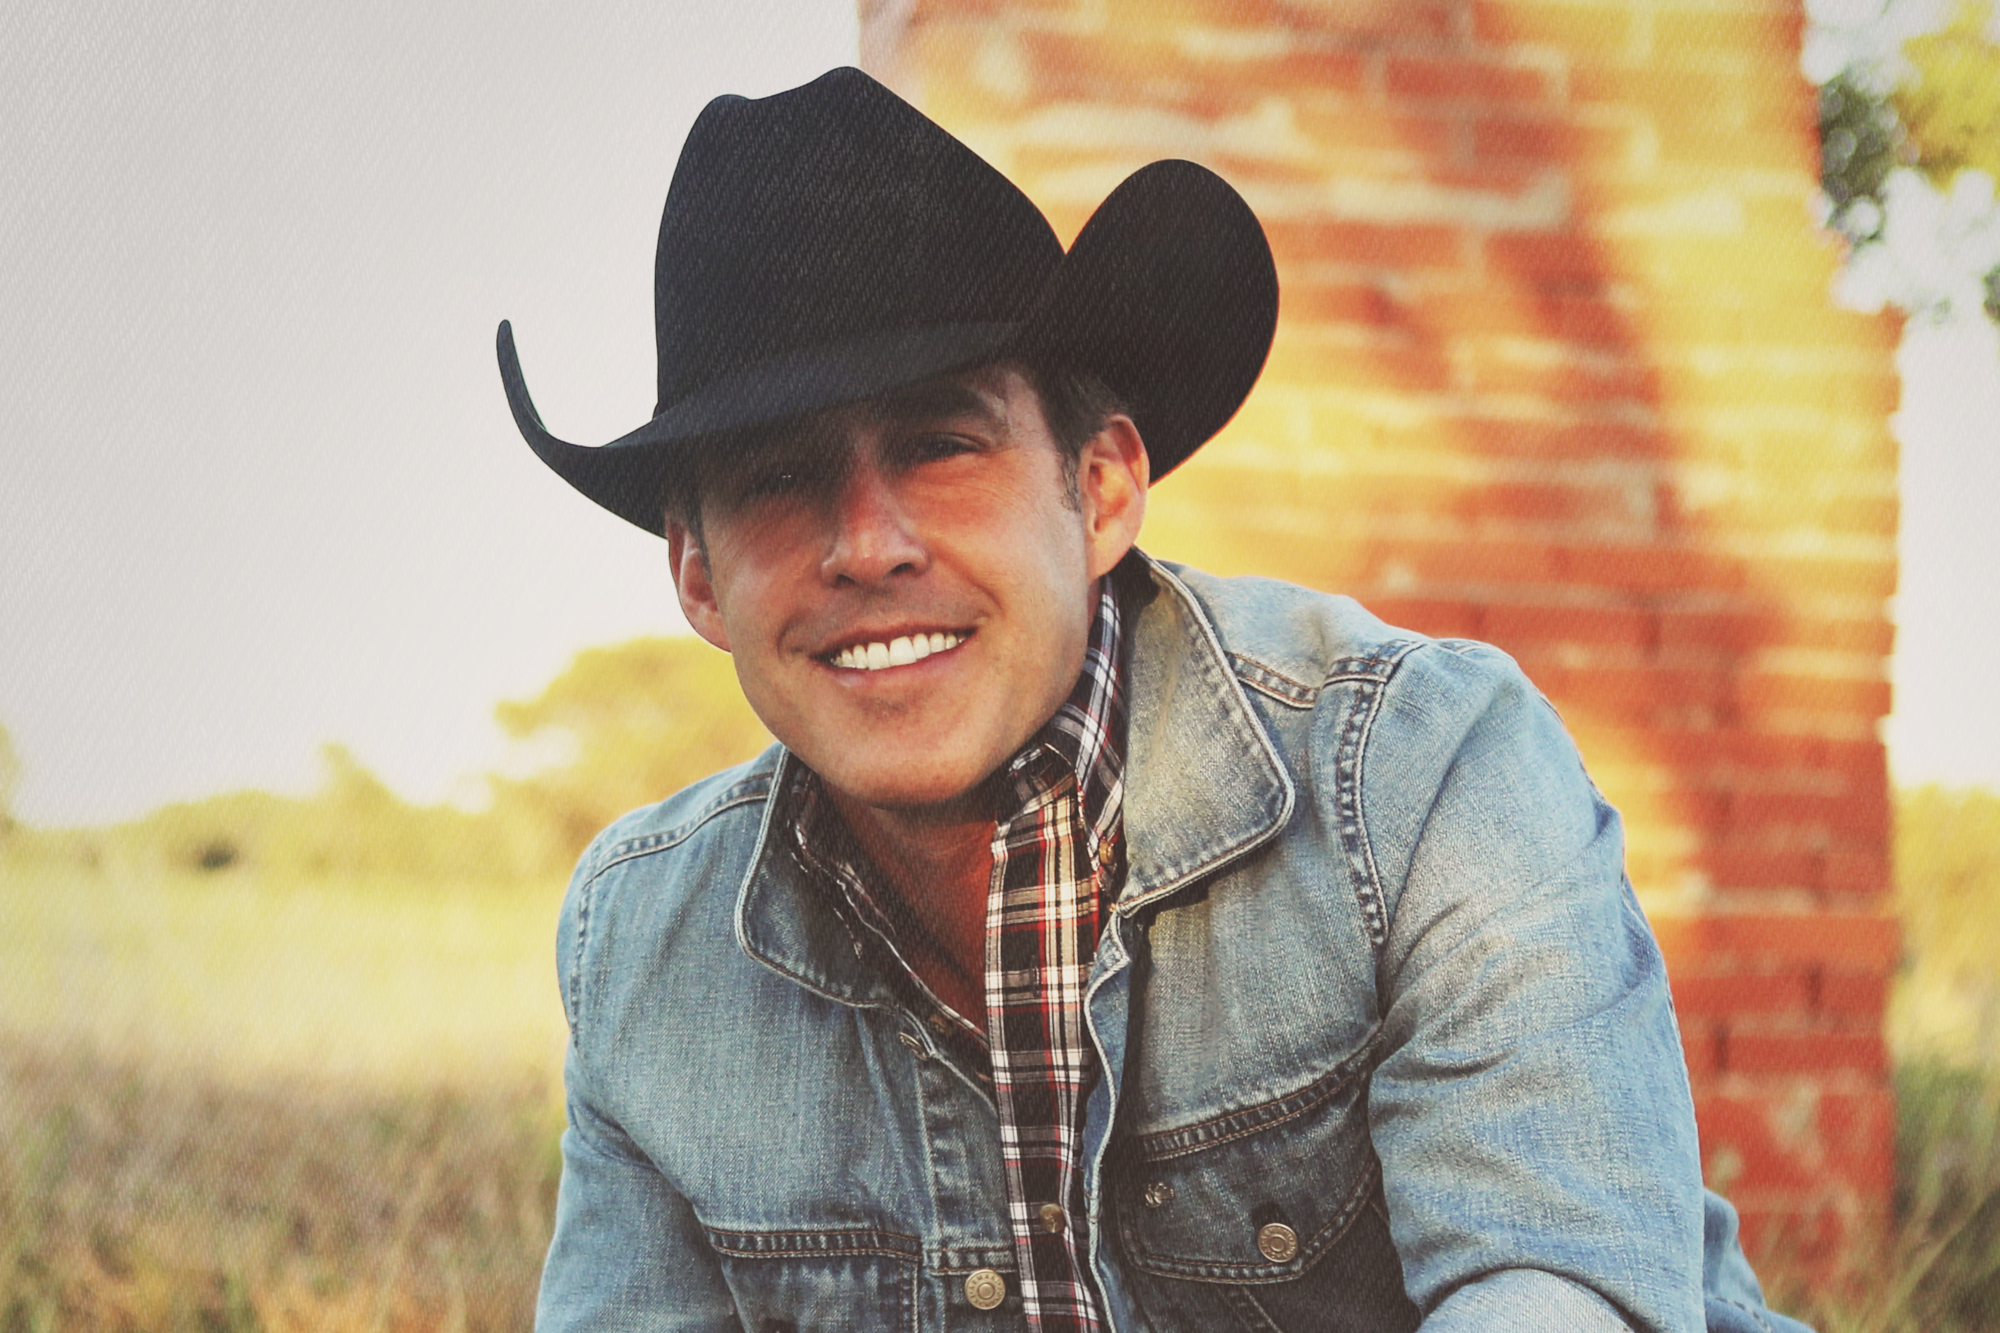 Aaron Watson Proves Love Songs and Good Times Still Exist in New Single “Whisper My Name”